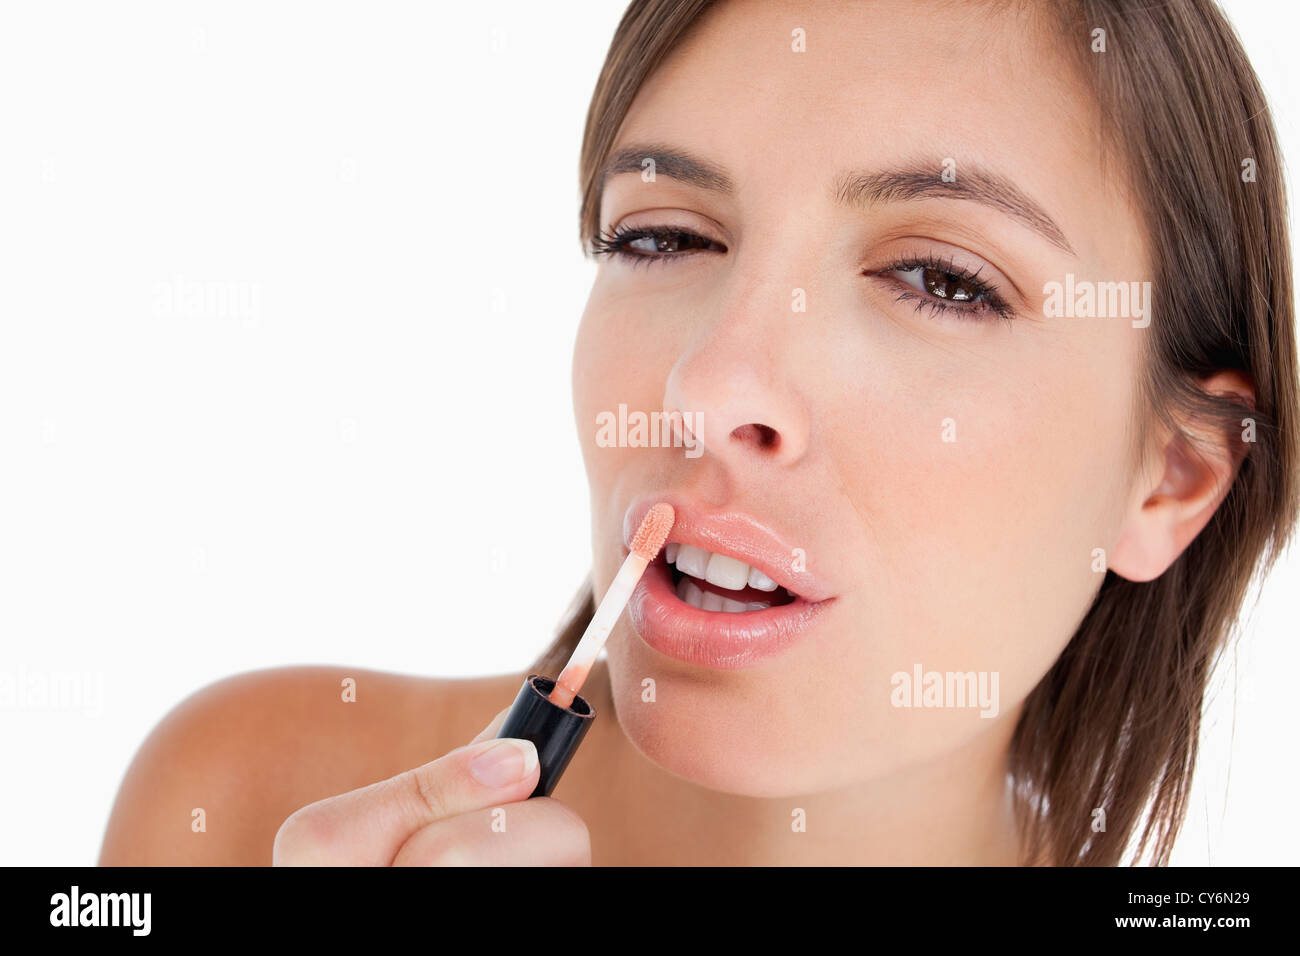 Concentrated young woman using a lip gloss brush to apply make-up Stock Photo